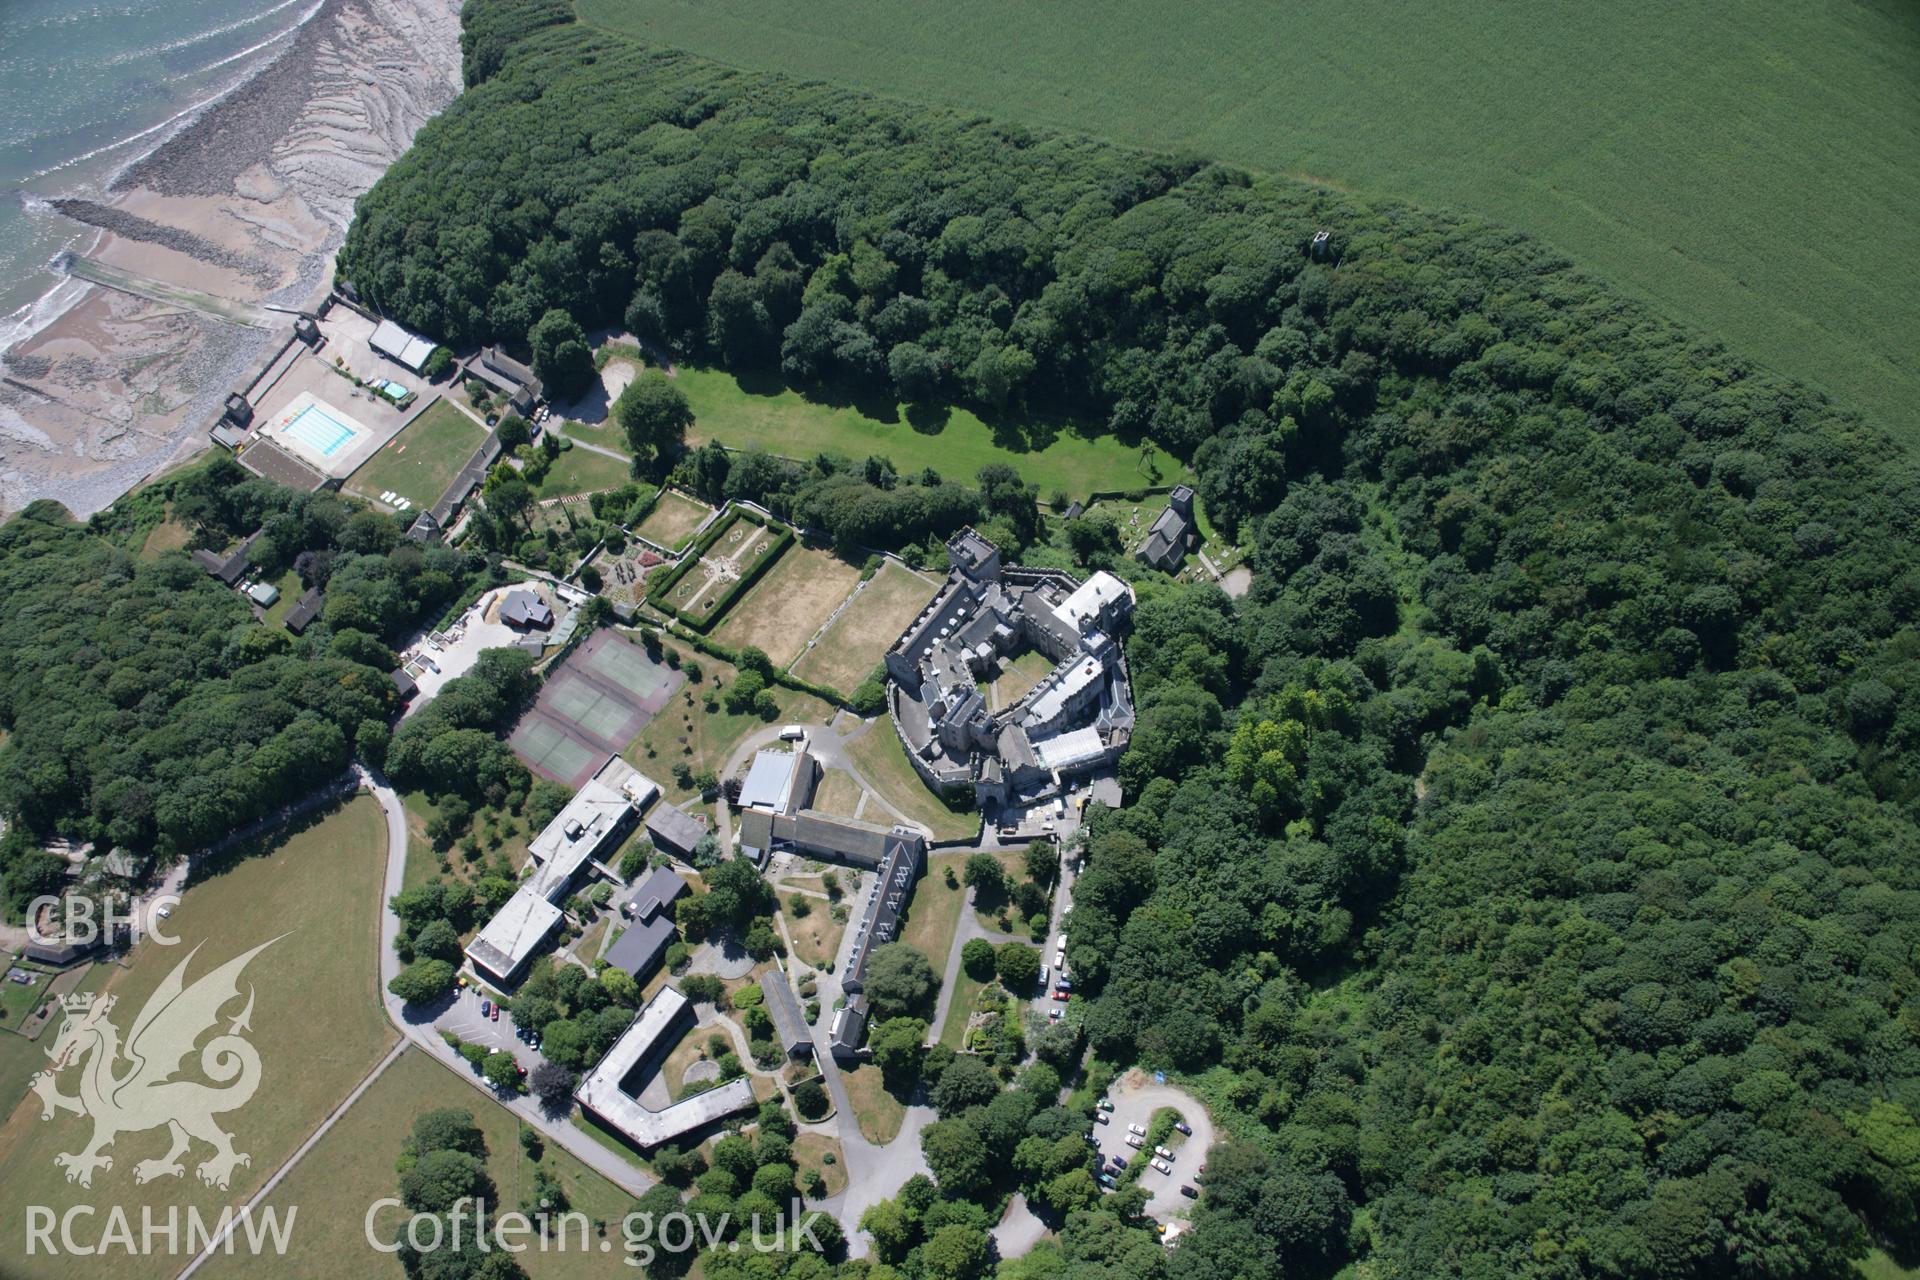 RCAHMW colour oblique aerial photograph of St Donat's Castle. Taken on 24 July 2006 by Toby Driver.